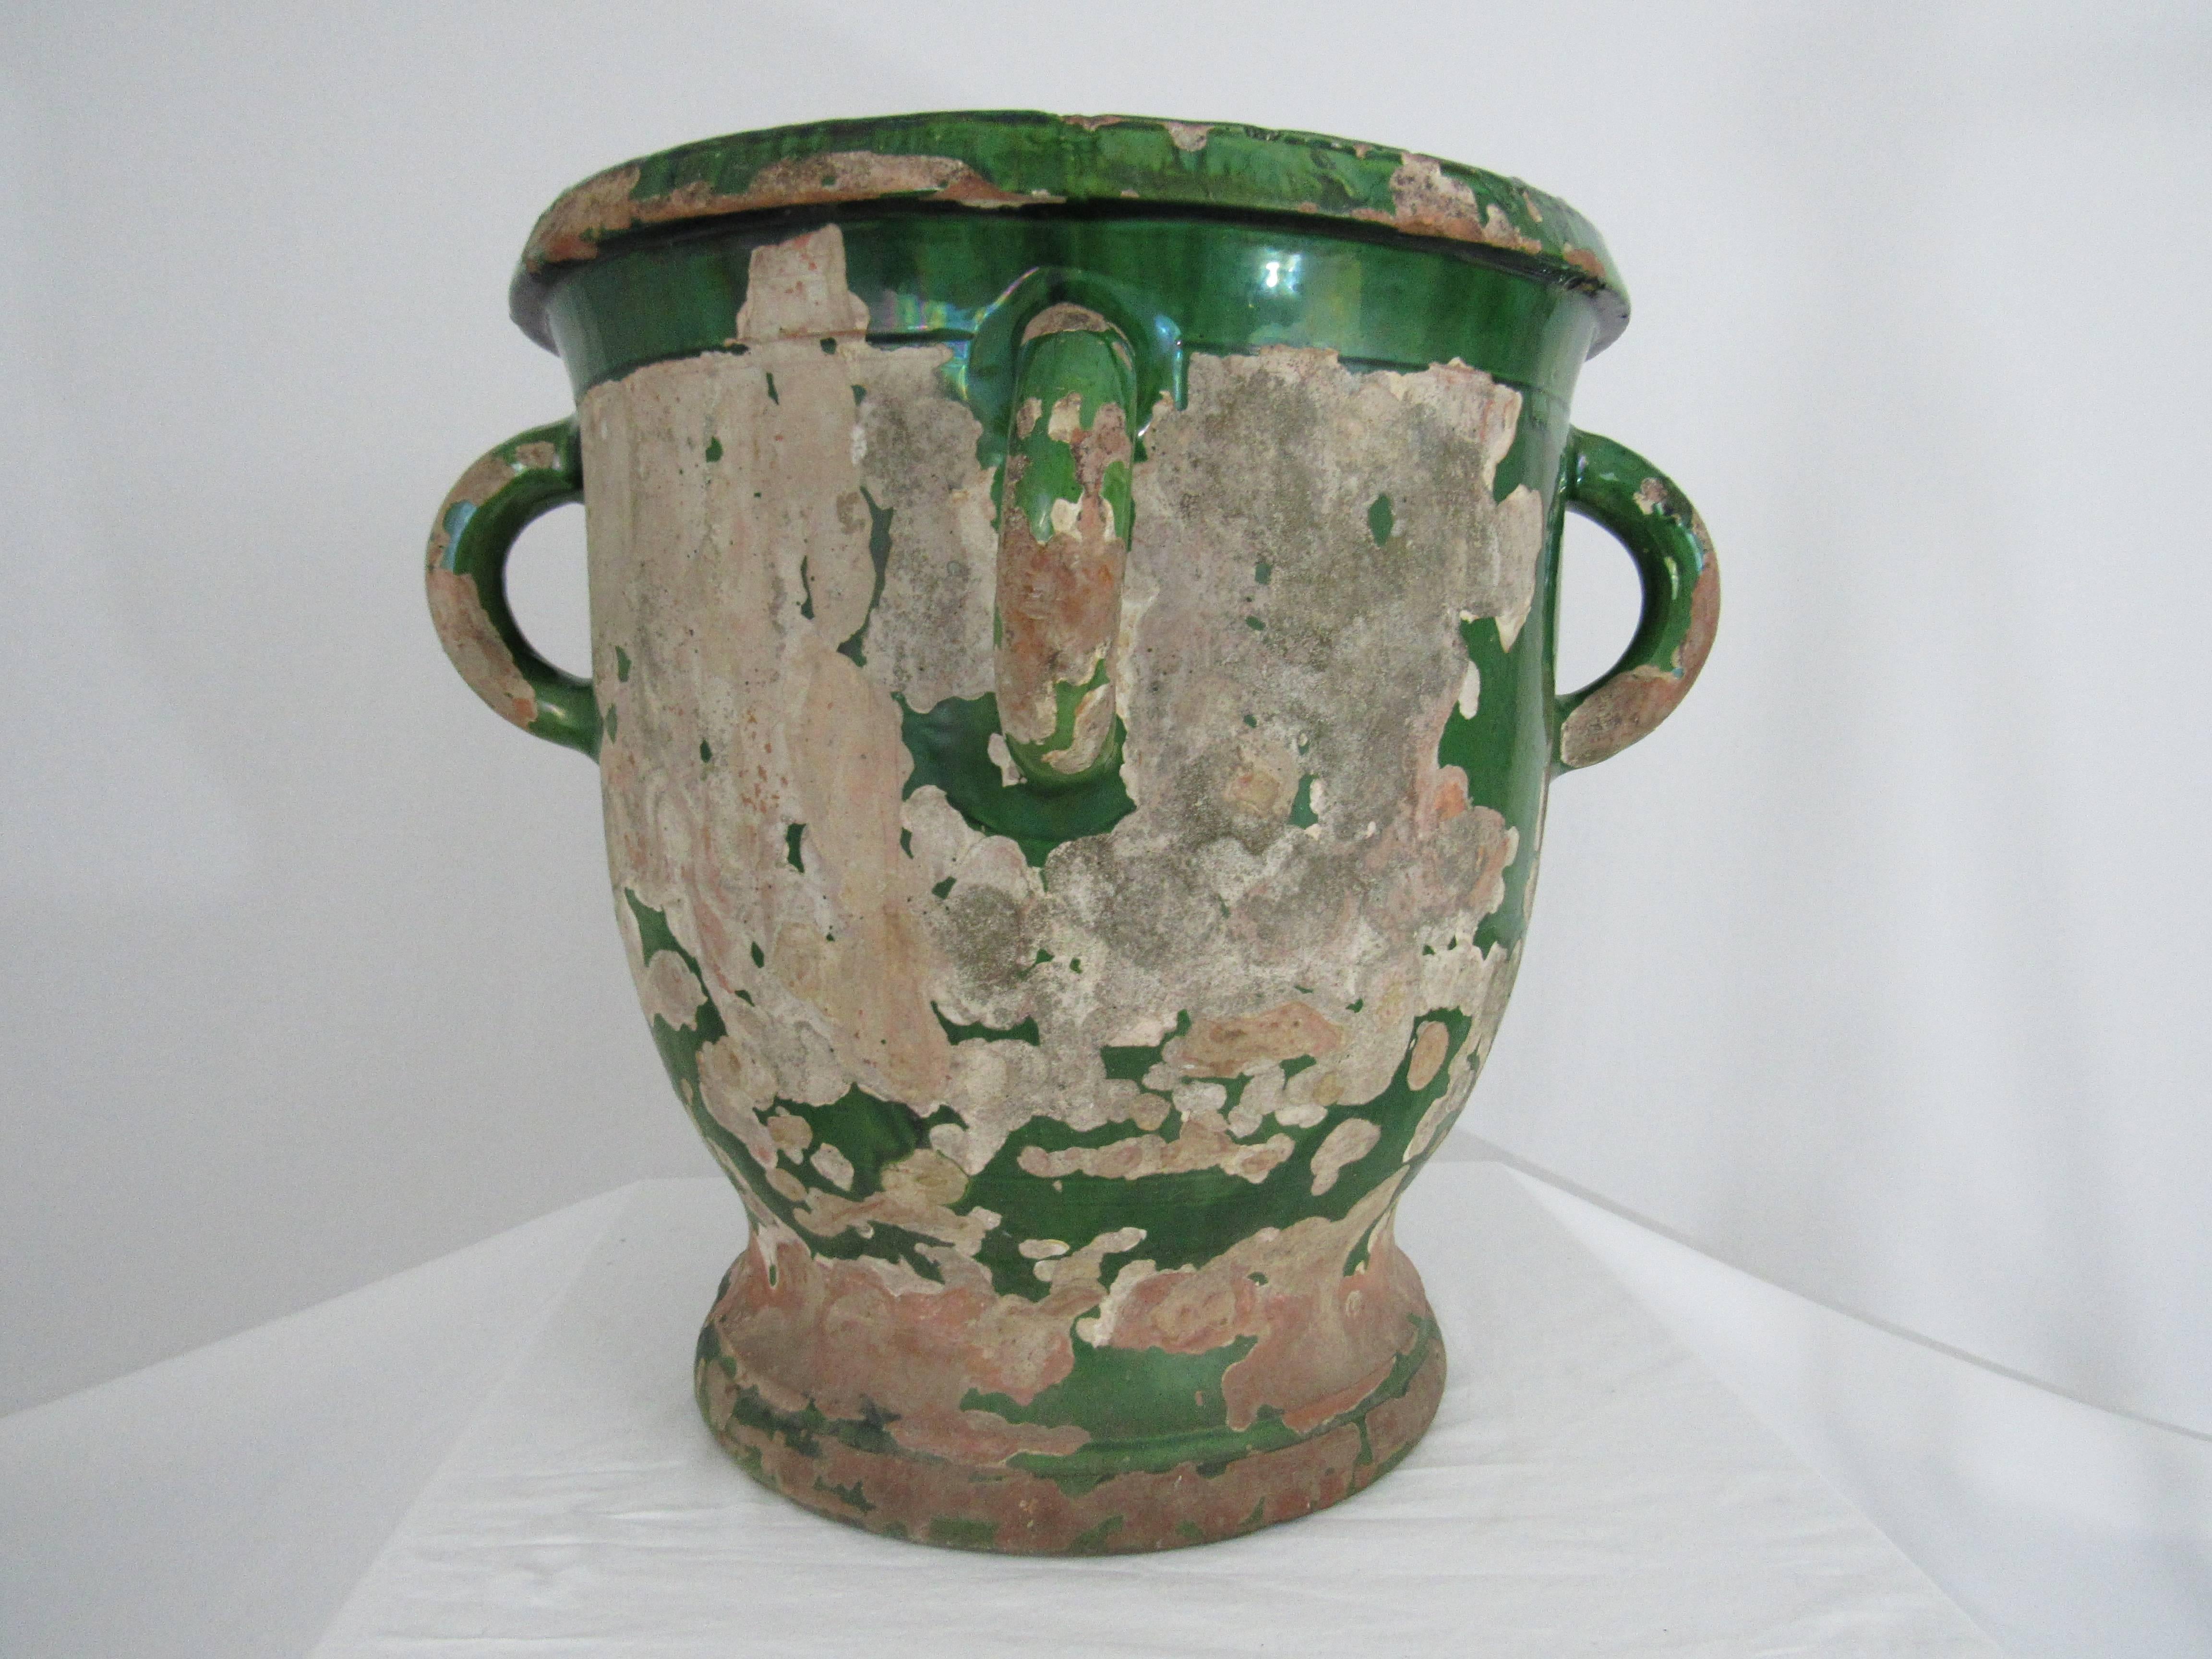 
A large boldly-scaled French emerald green glazed terra cotta garden urn from Anduze, France. The urn has a bell shape body with four handles and an everted lip. The inside of the urn is in excellent condition and ready for use in your garden.

